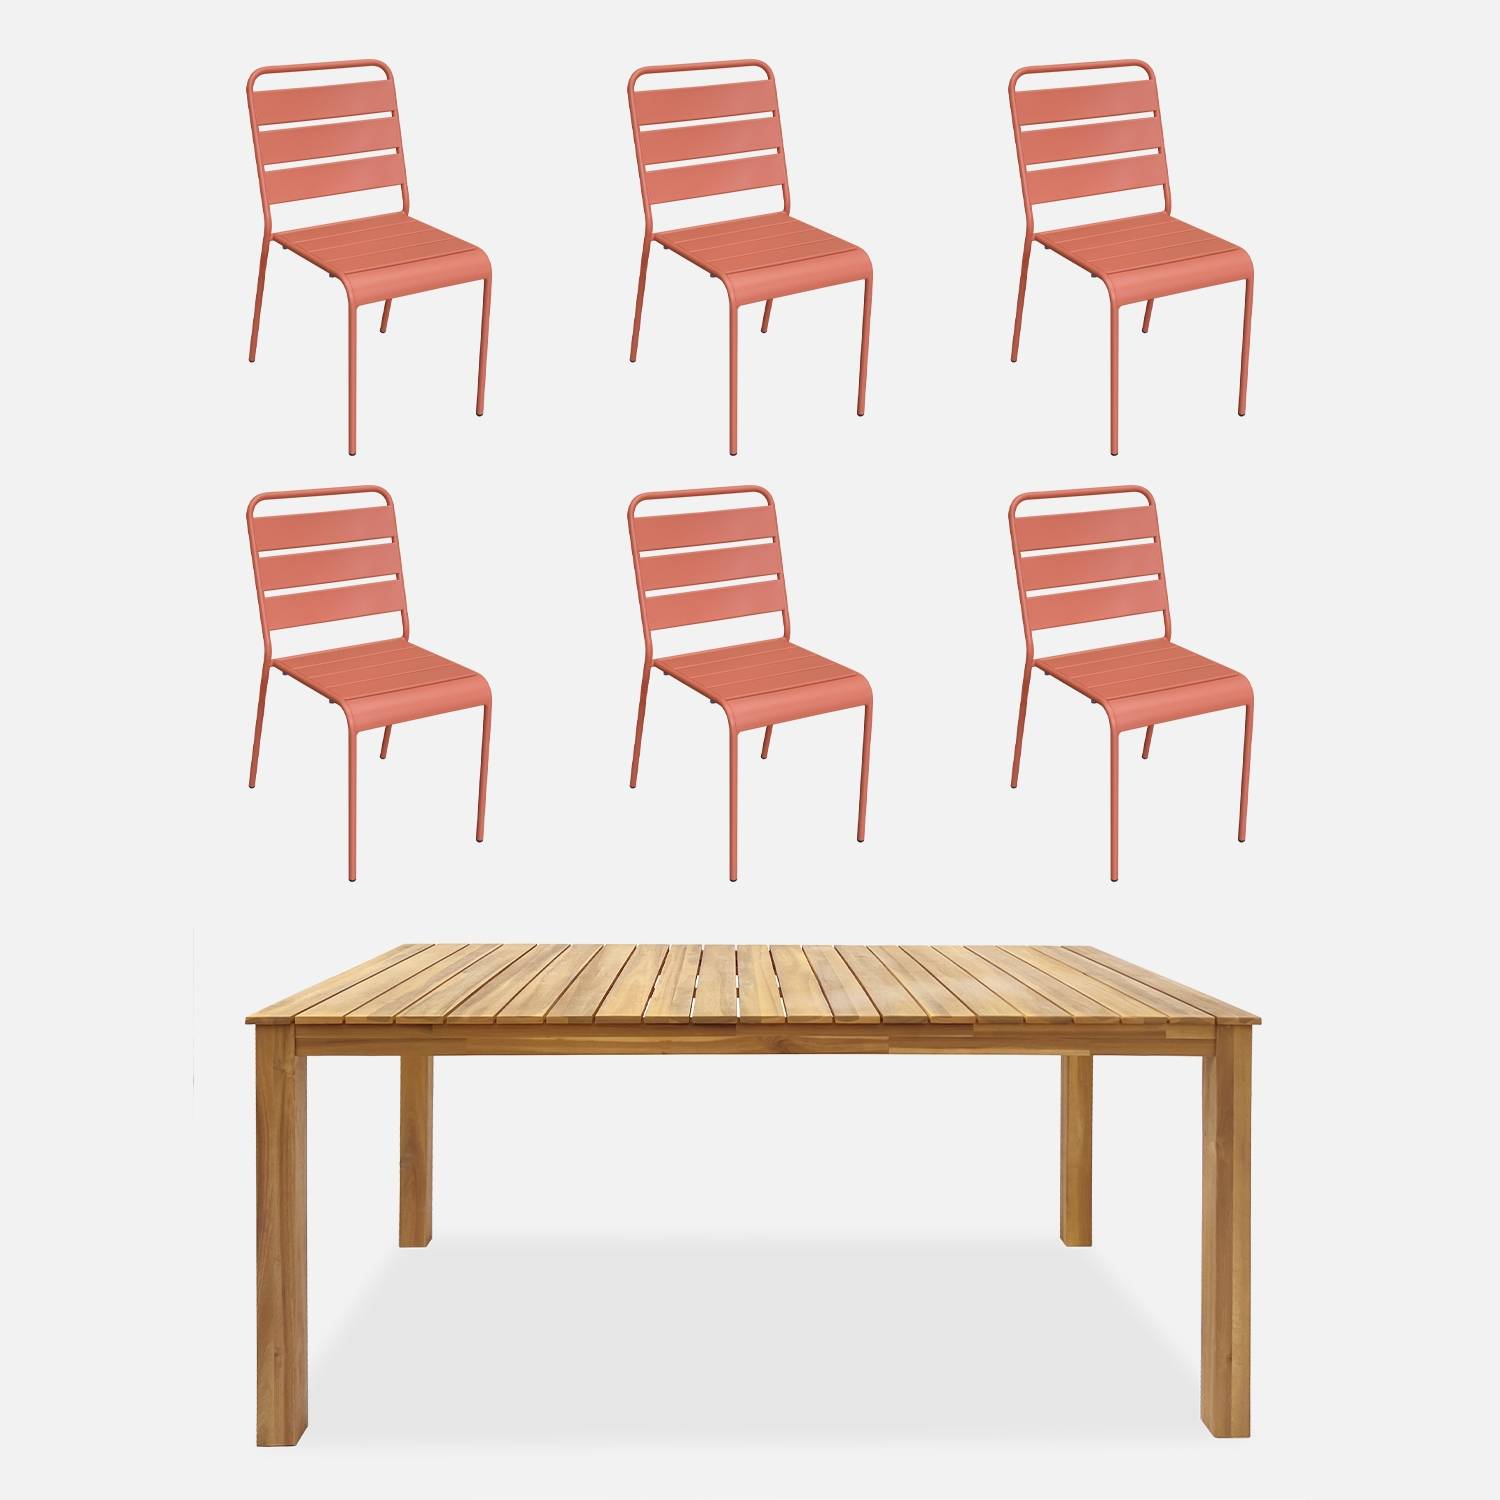 Table bois d'acacia + 6 chaises empilables rose I sweeek